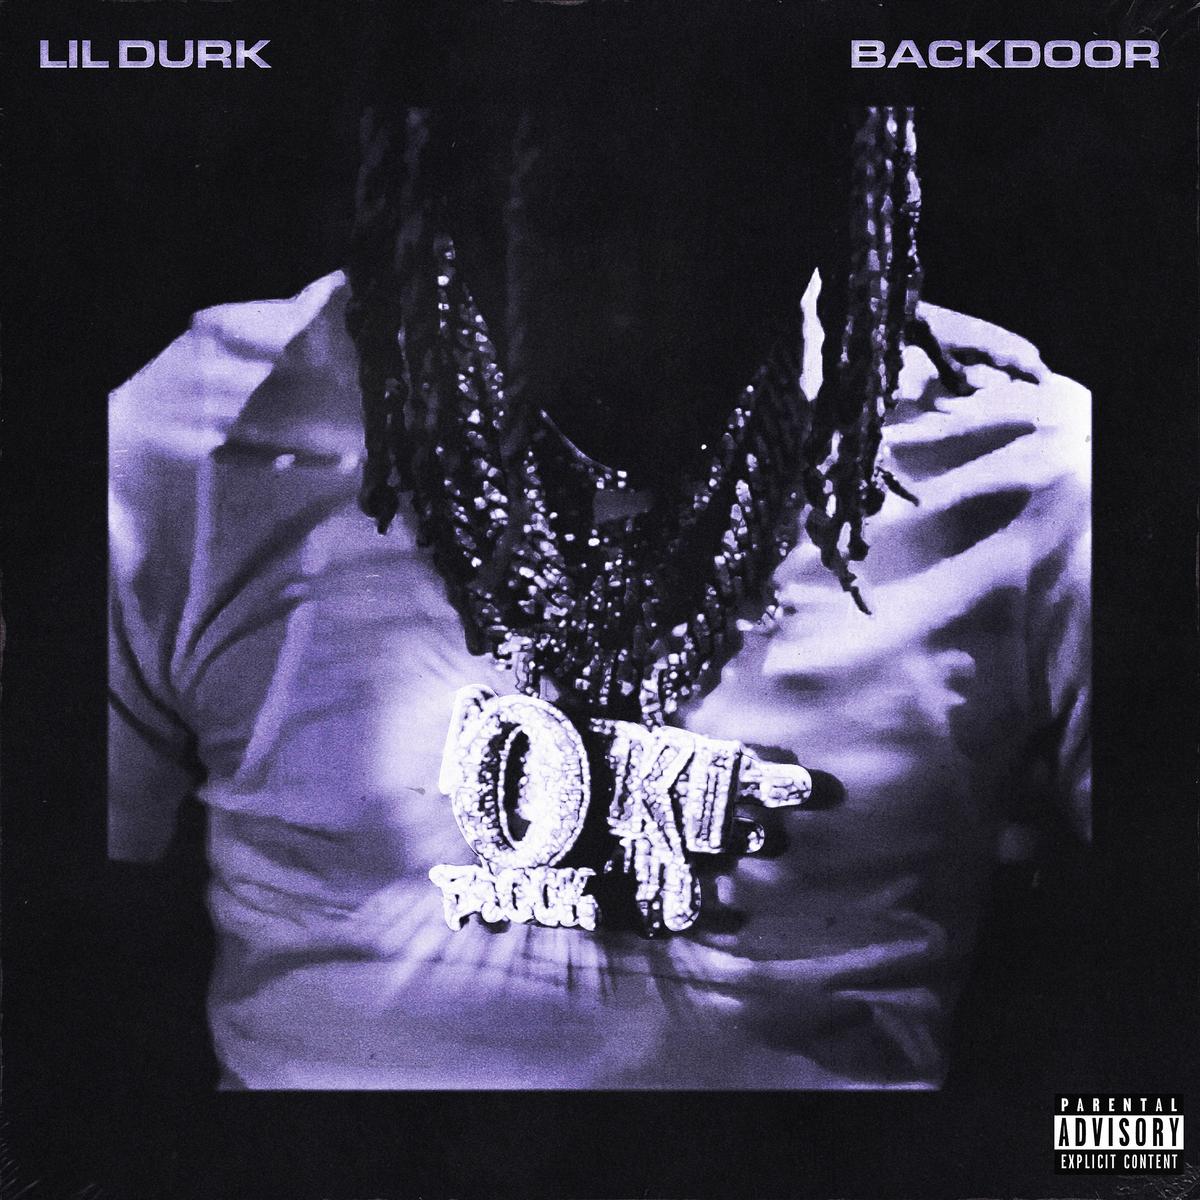 Lil Durk Returns With The Very Powerful “Backdoor”